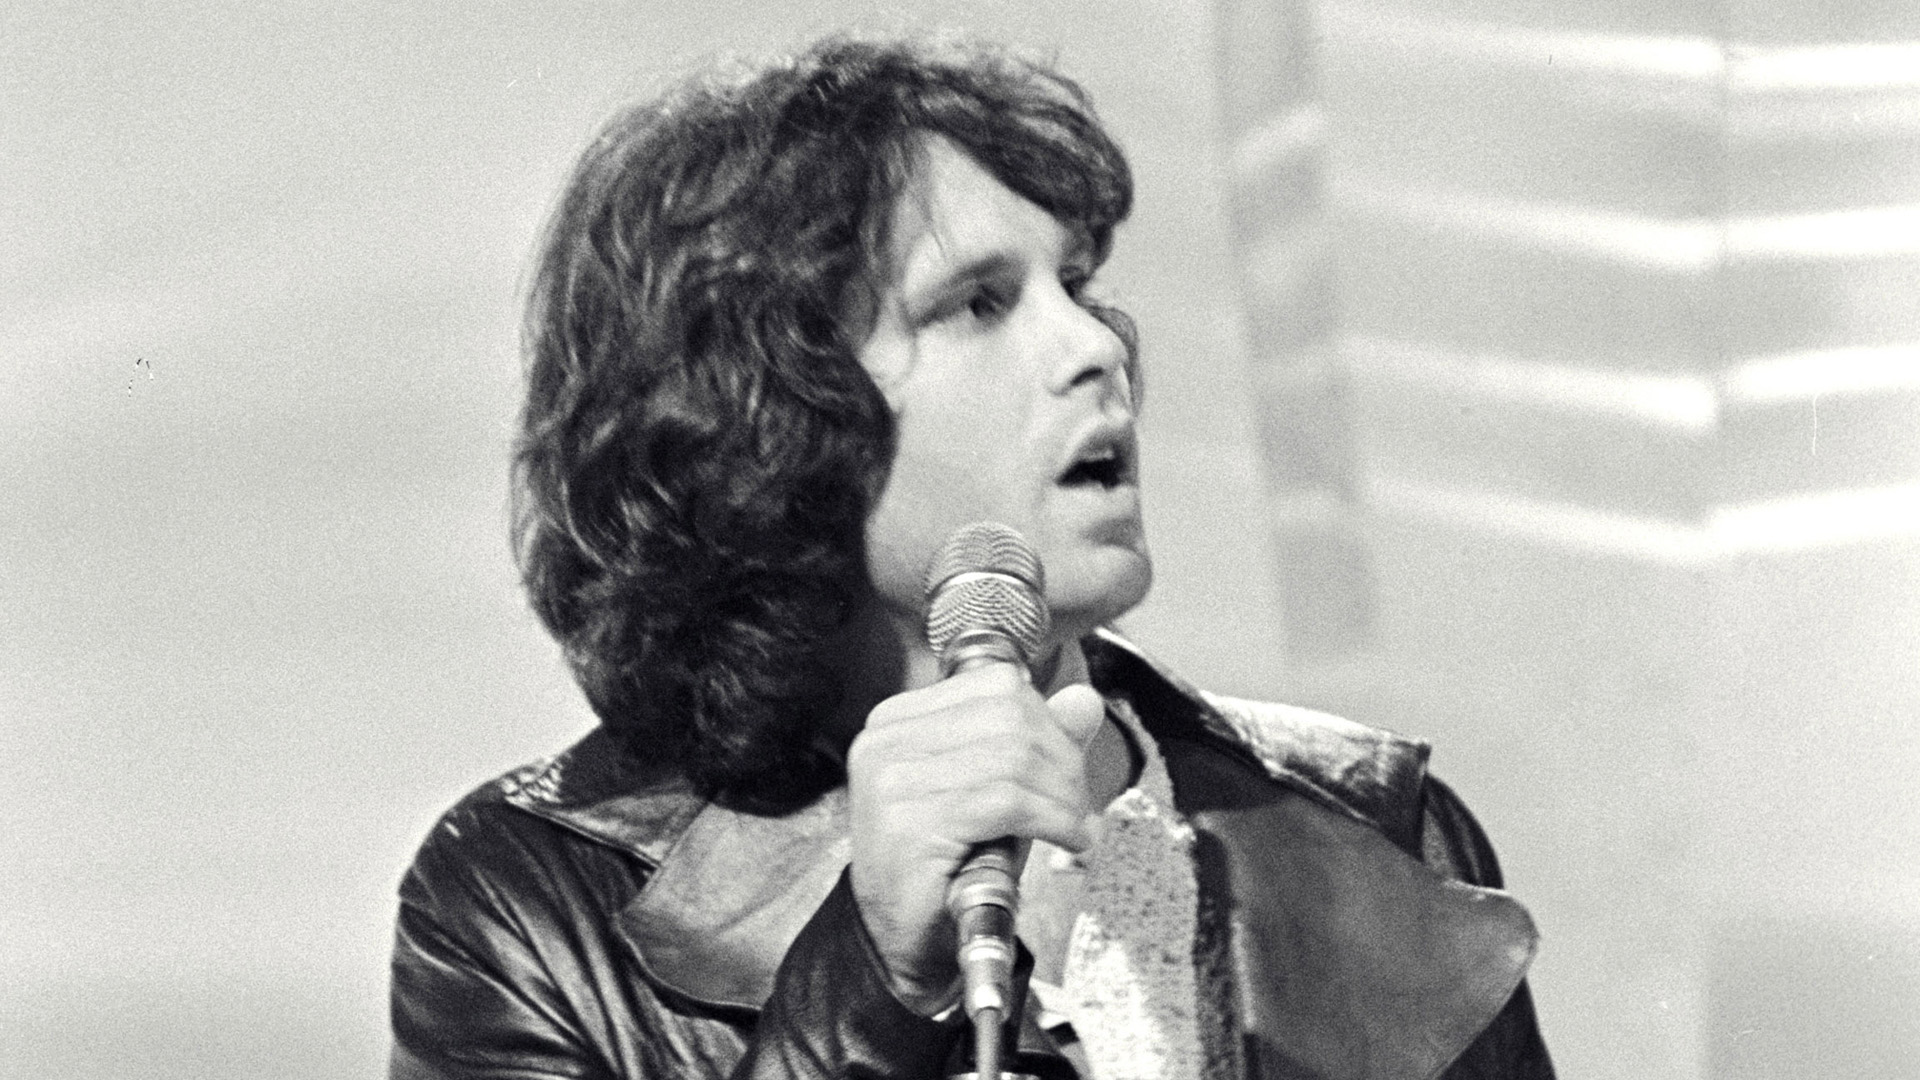 Jim Morrison Wallpaper Full HD Pictures To Pin